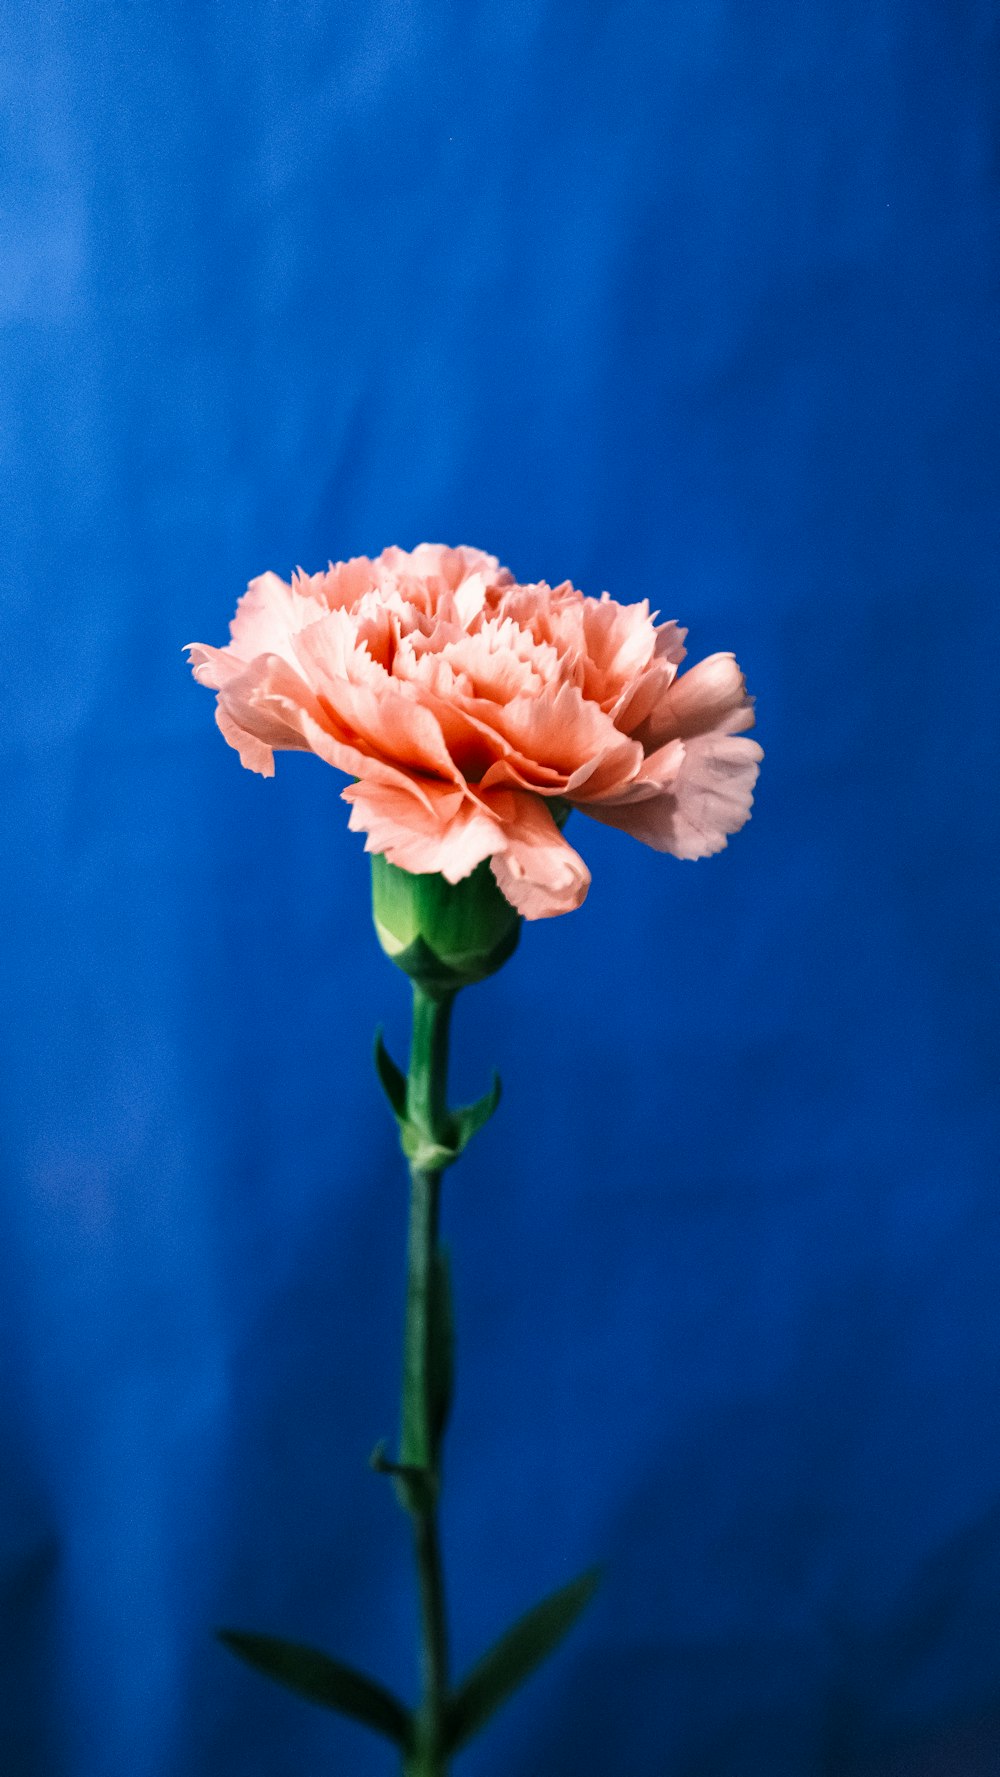 a single pink flower on a blue background